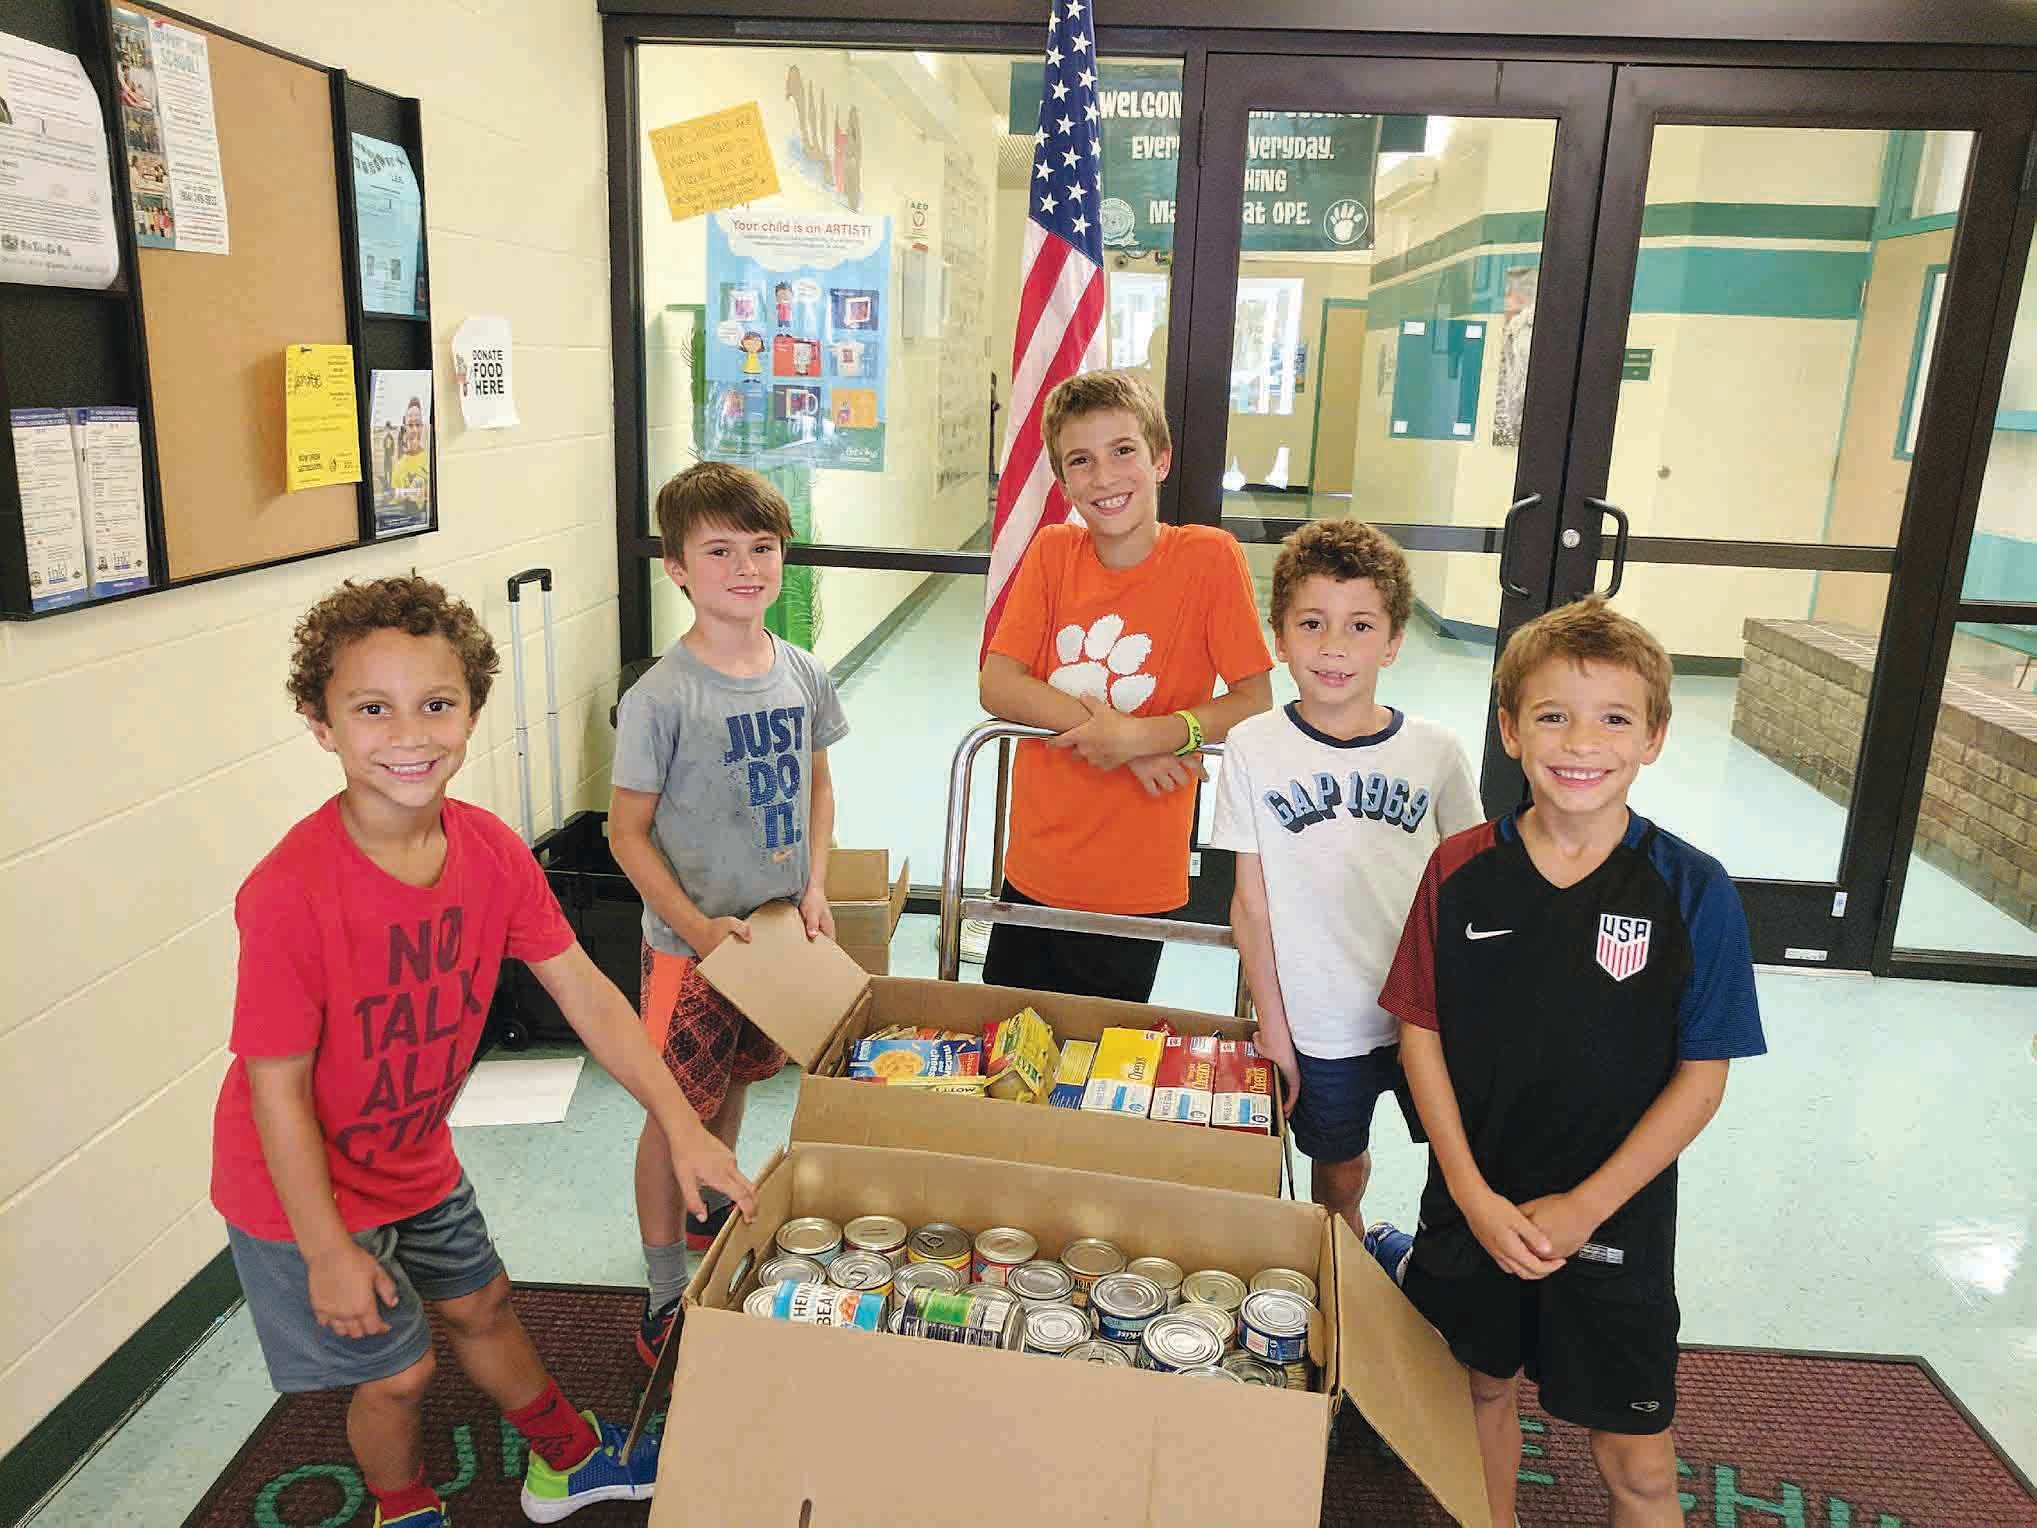 Ocean Palms Elementary recently exceeded its goal of collecting 1,000 food items by collecting 1,789 - a full day before the deadline. Donations benefit the St. Francis House, Migrant Workers in Armstrong and the Celebration Lutheran Food Pantry. School students celebrated the achievement by wearing a crazy/favorite hat on Friday, Sept. 8.